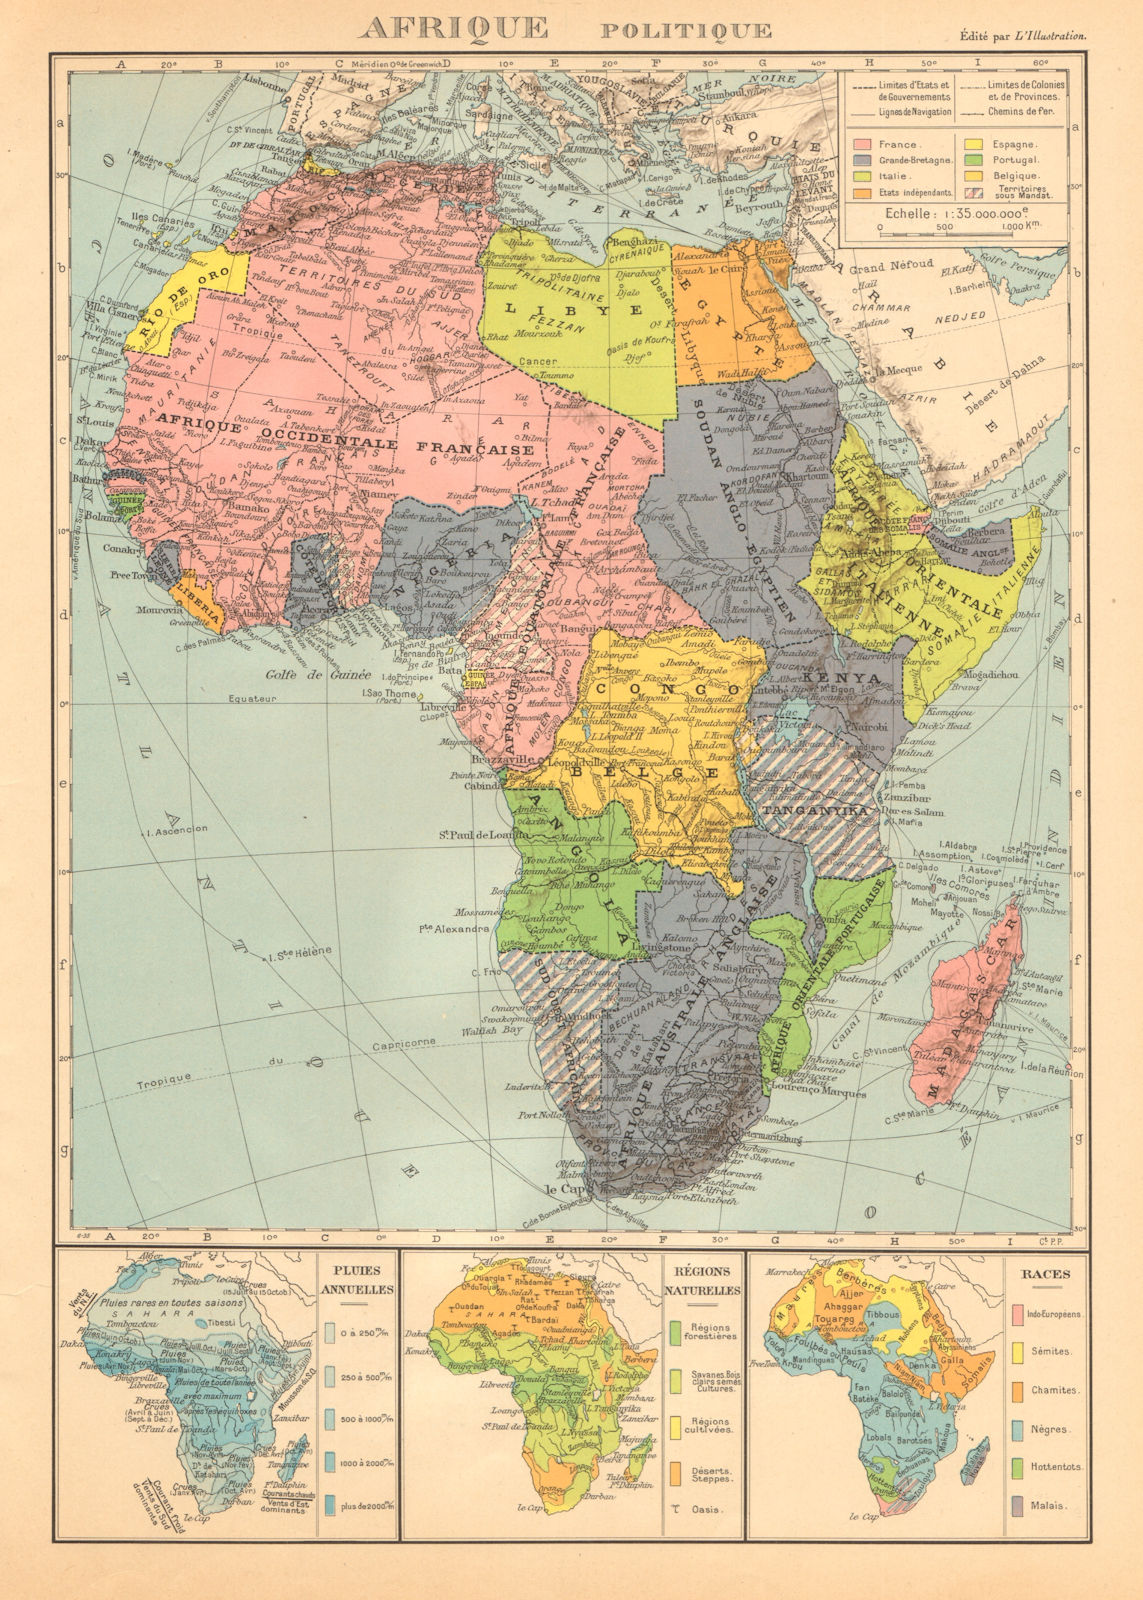 COLONIAL AFRICA Afrique. League of Nations Mandates. Ethnicity 1938 old map